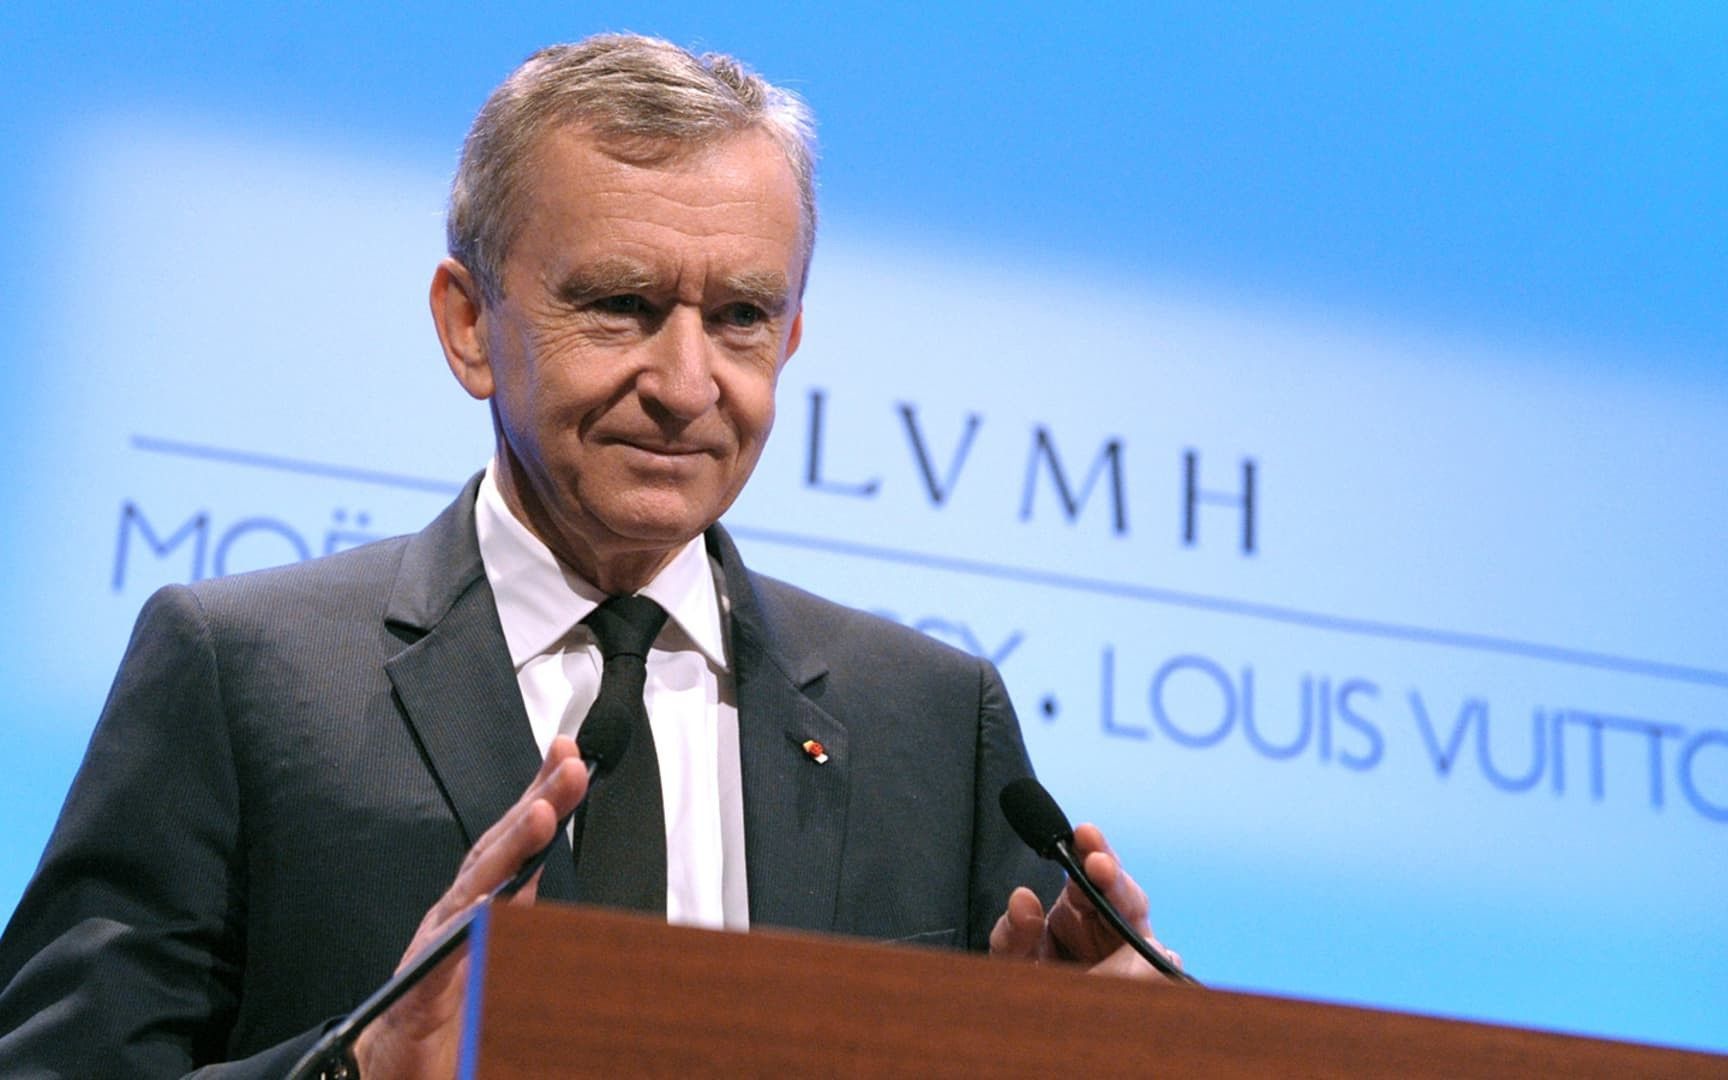 Money laundering: LVMH chairman under investigation - Jeweller Magazine:  Jewellery News and Trends